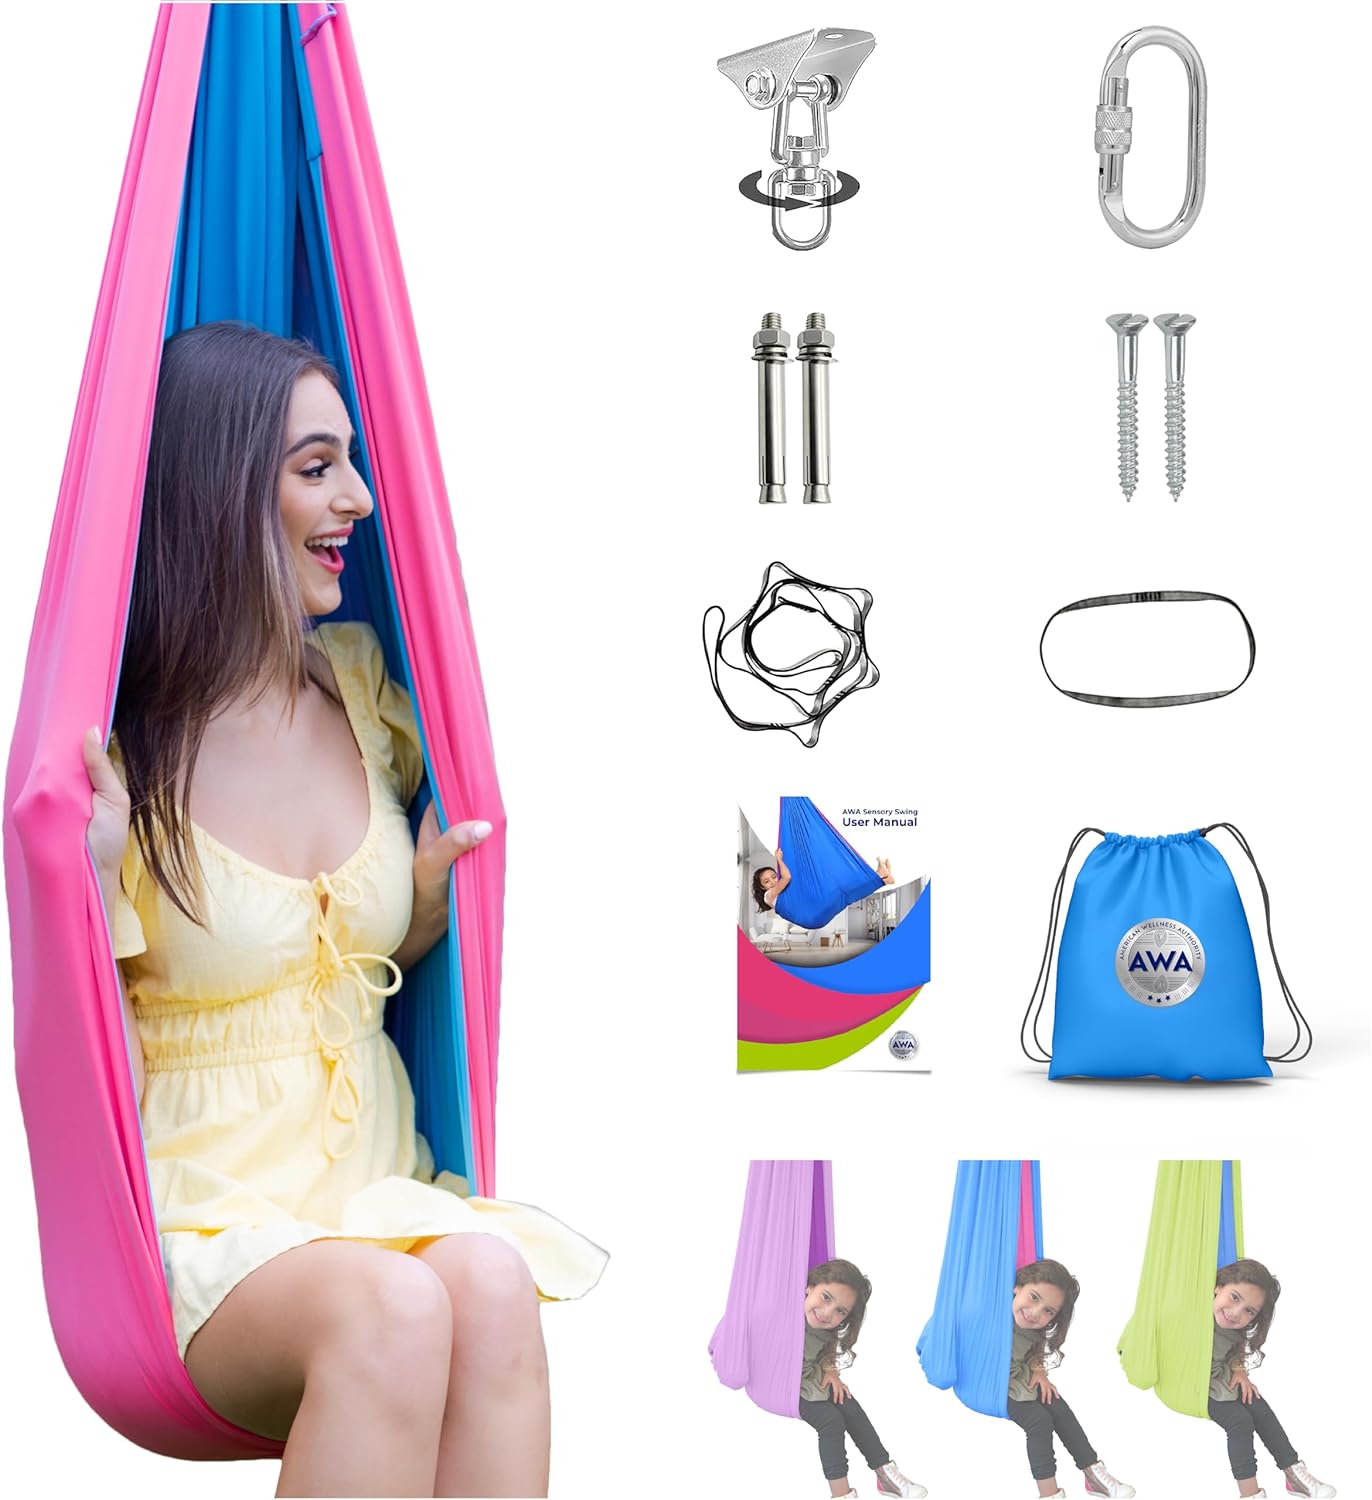 Sensory Swing for kids with special needs